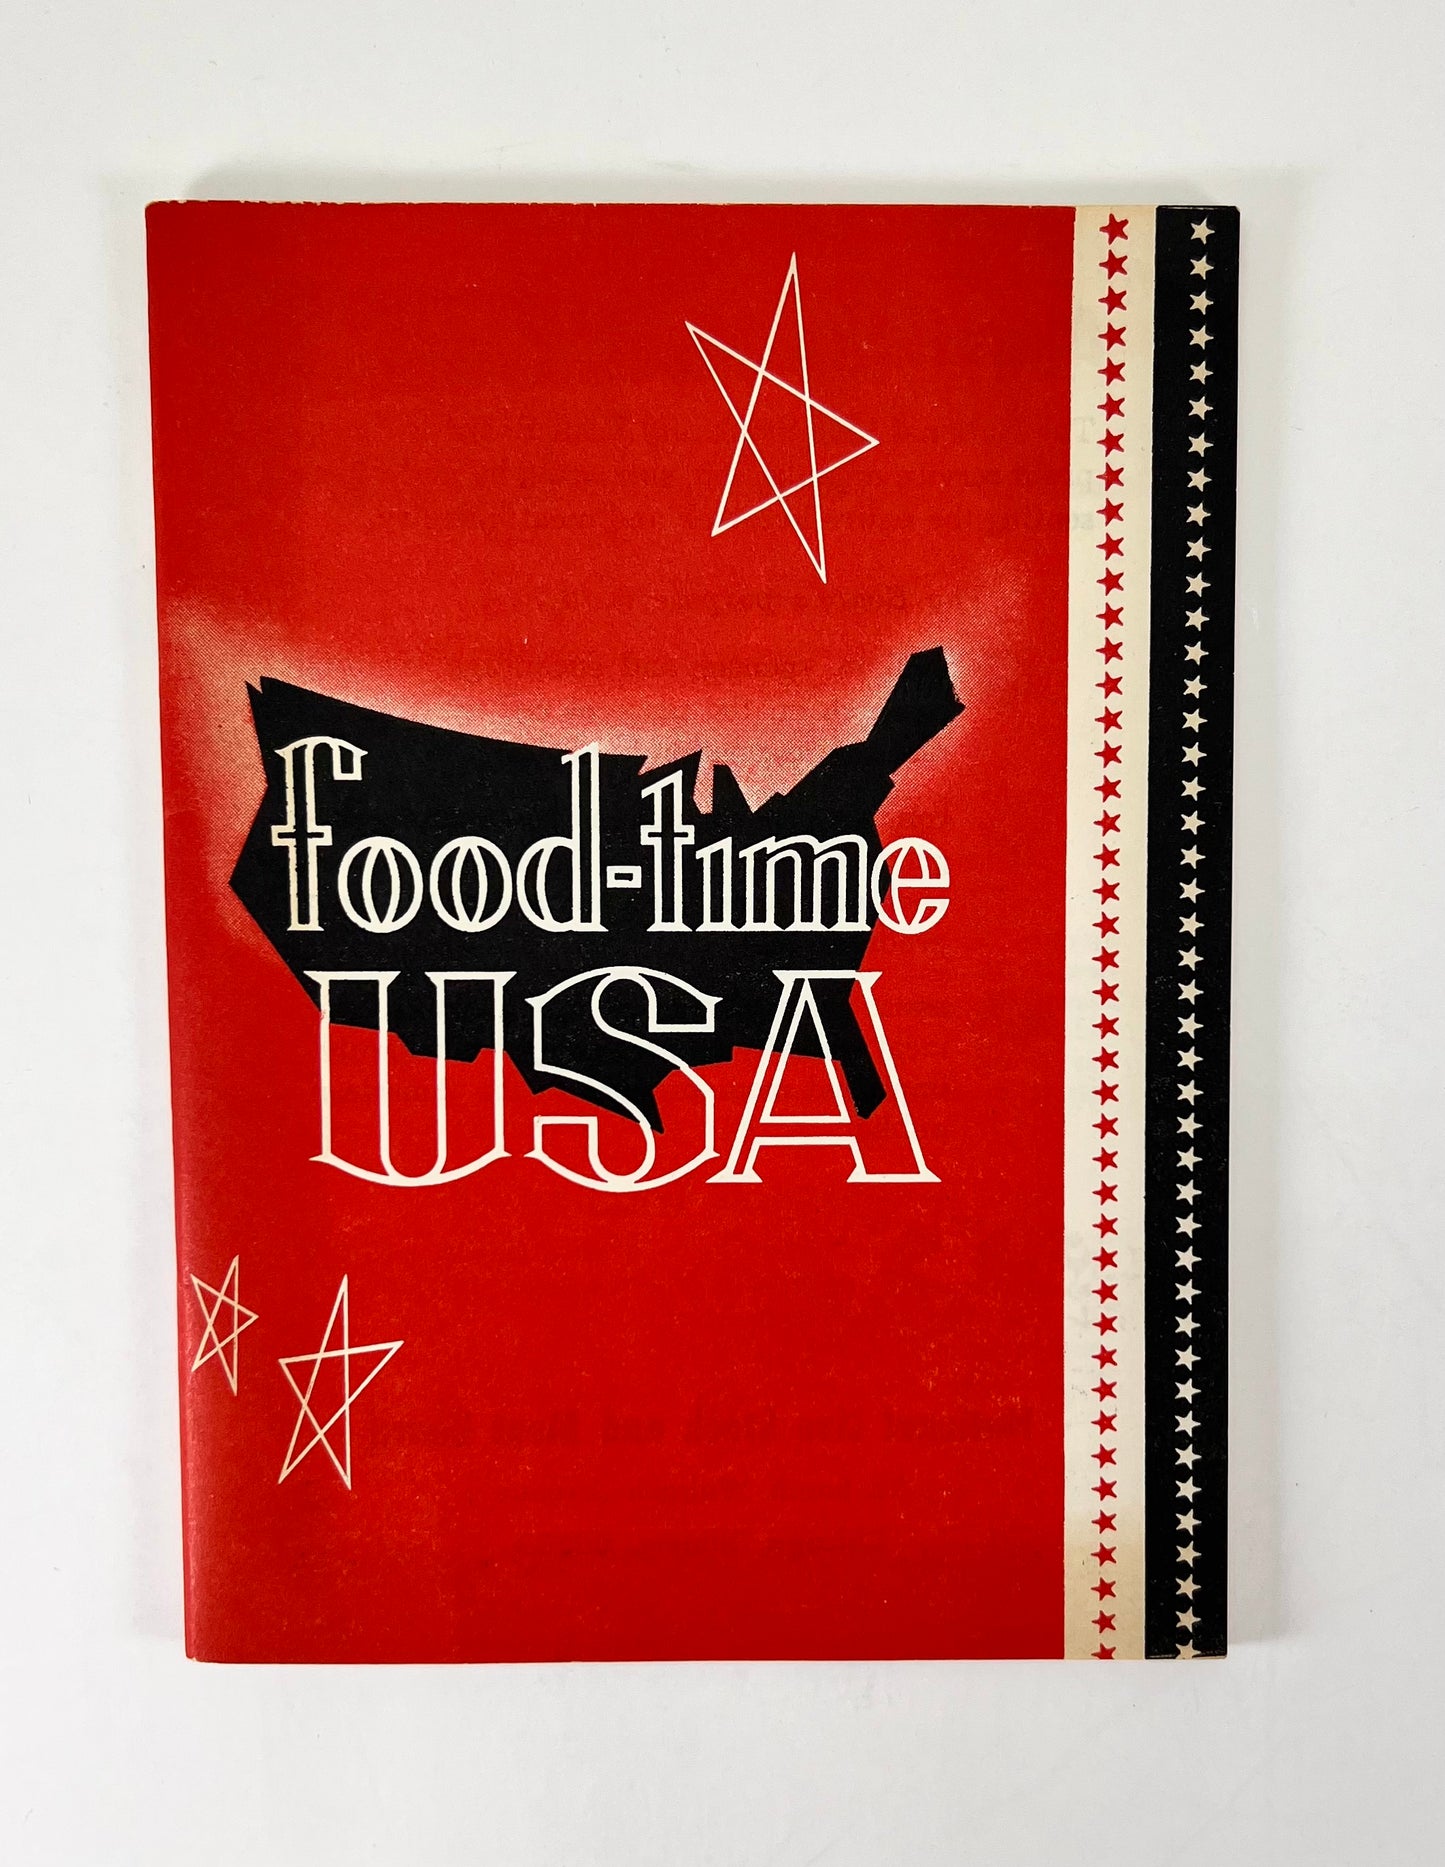 Food-time USA Cookbook from The National Live Stock and Meat Board and WEEU Radio, 1959